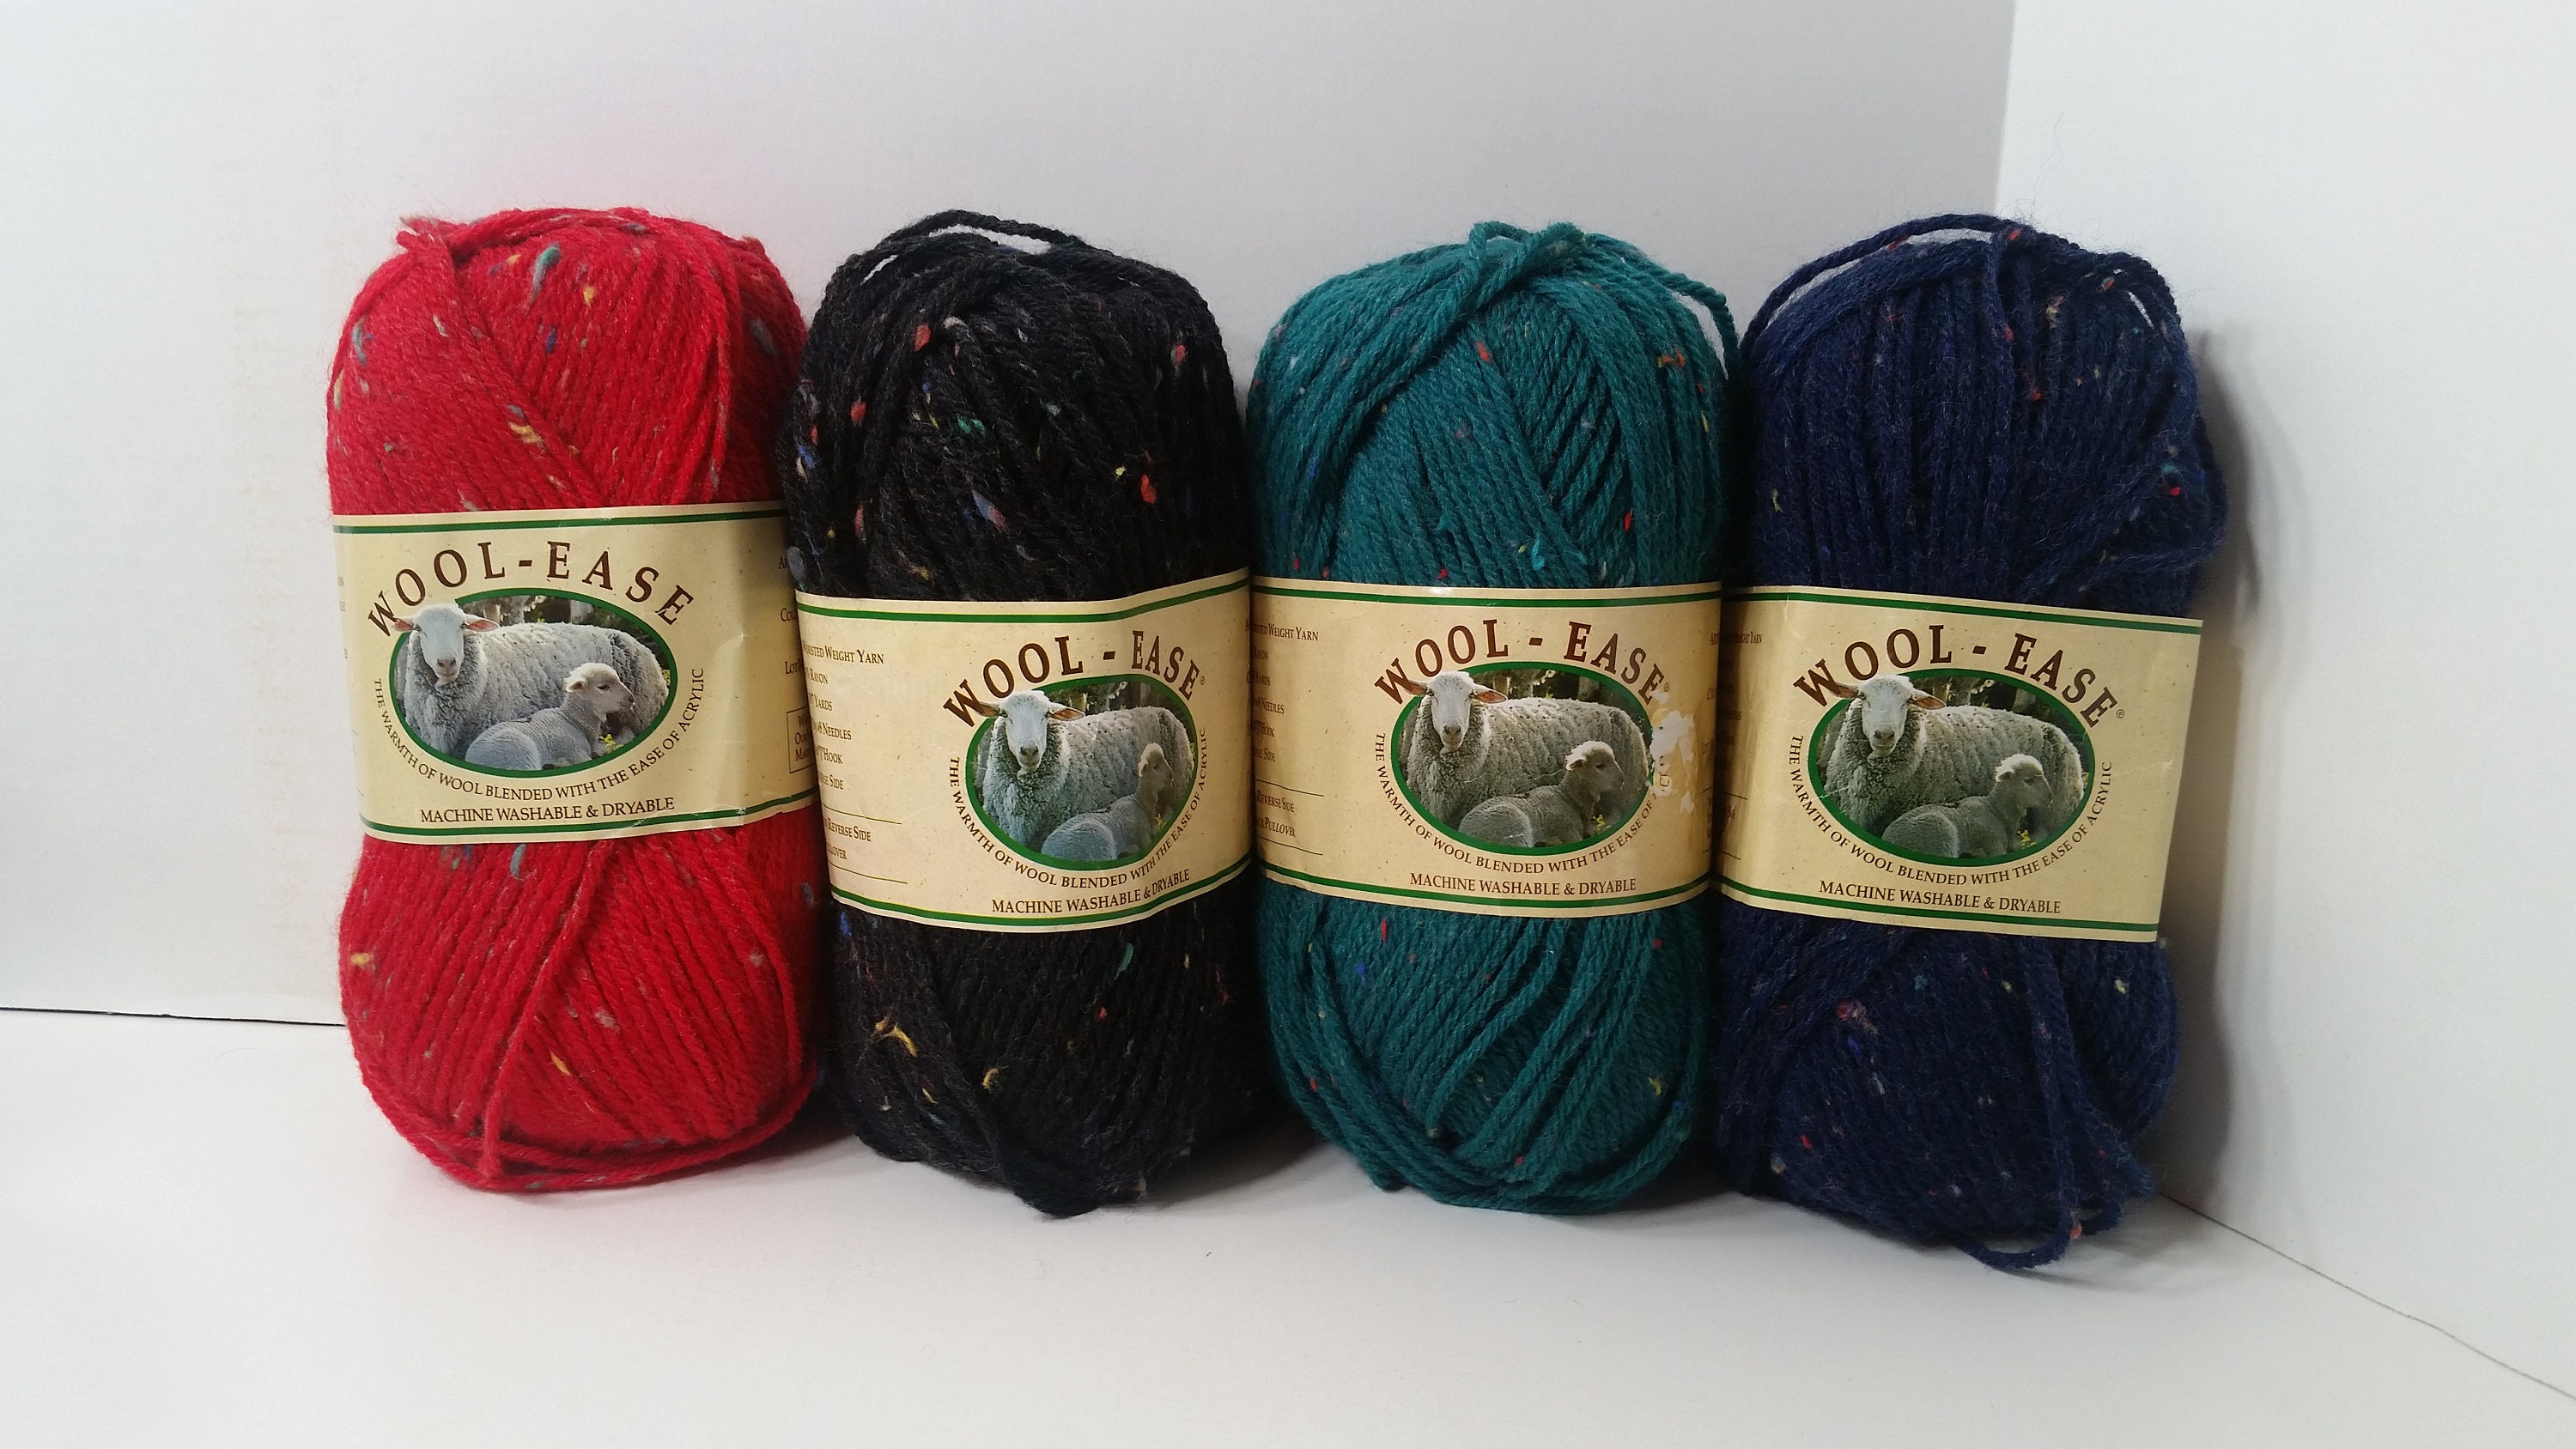 Lion Brand Wool Ease Yarn Forest Green Heather.